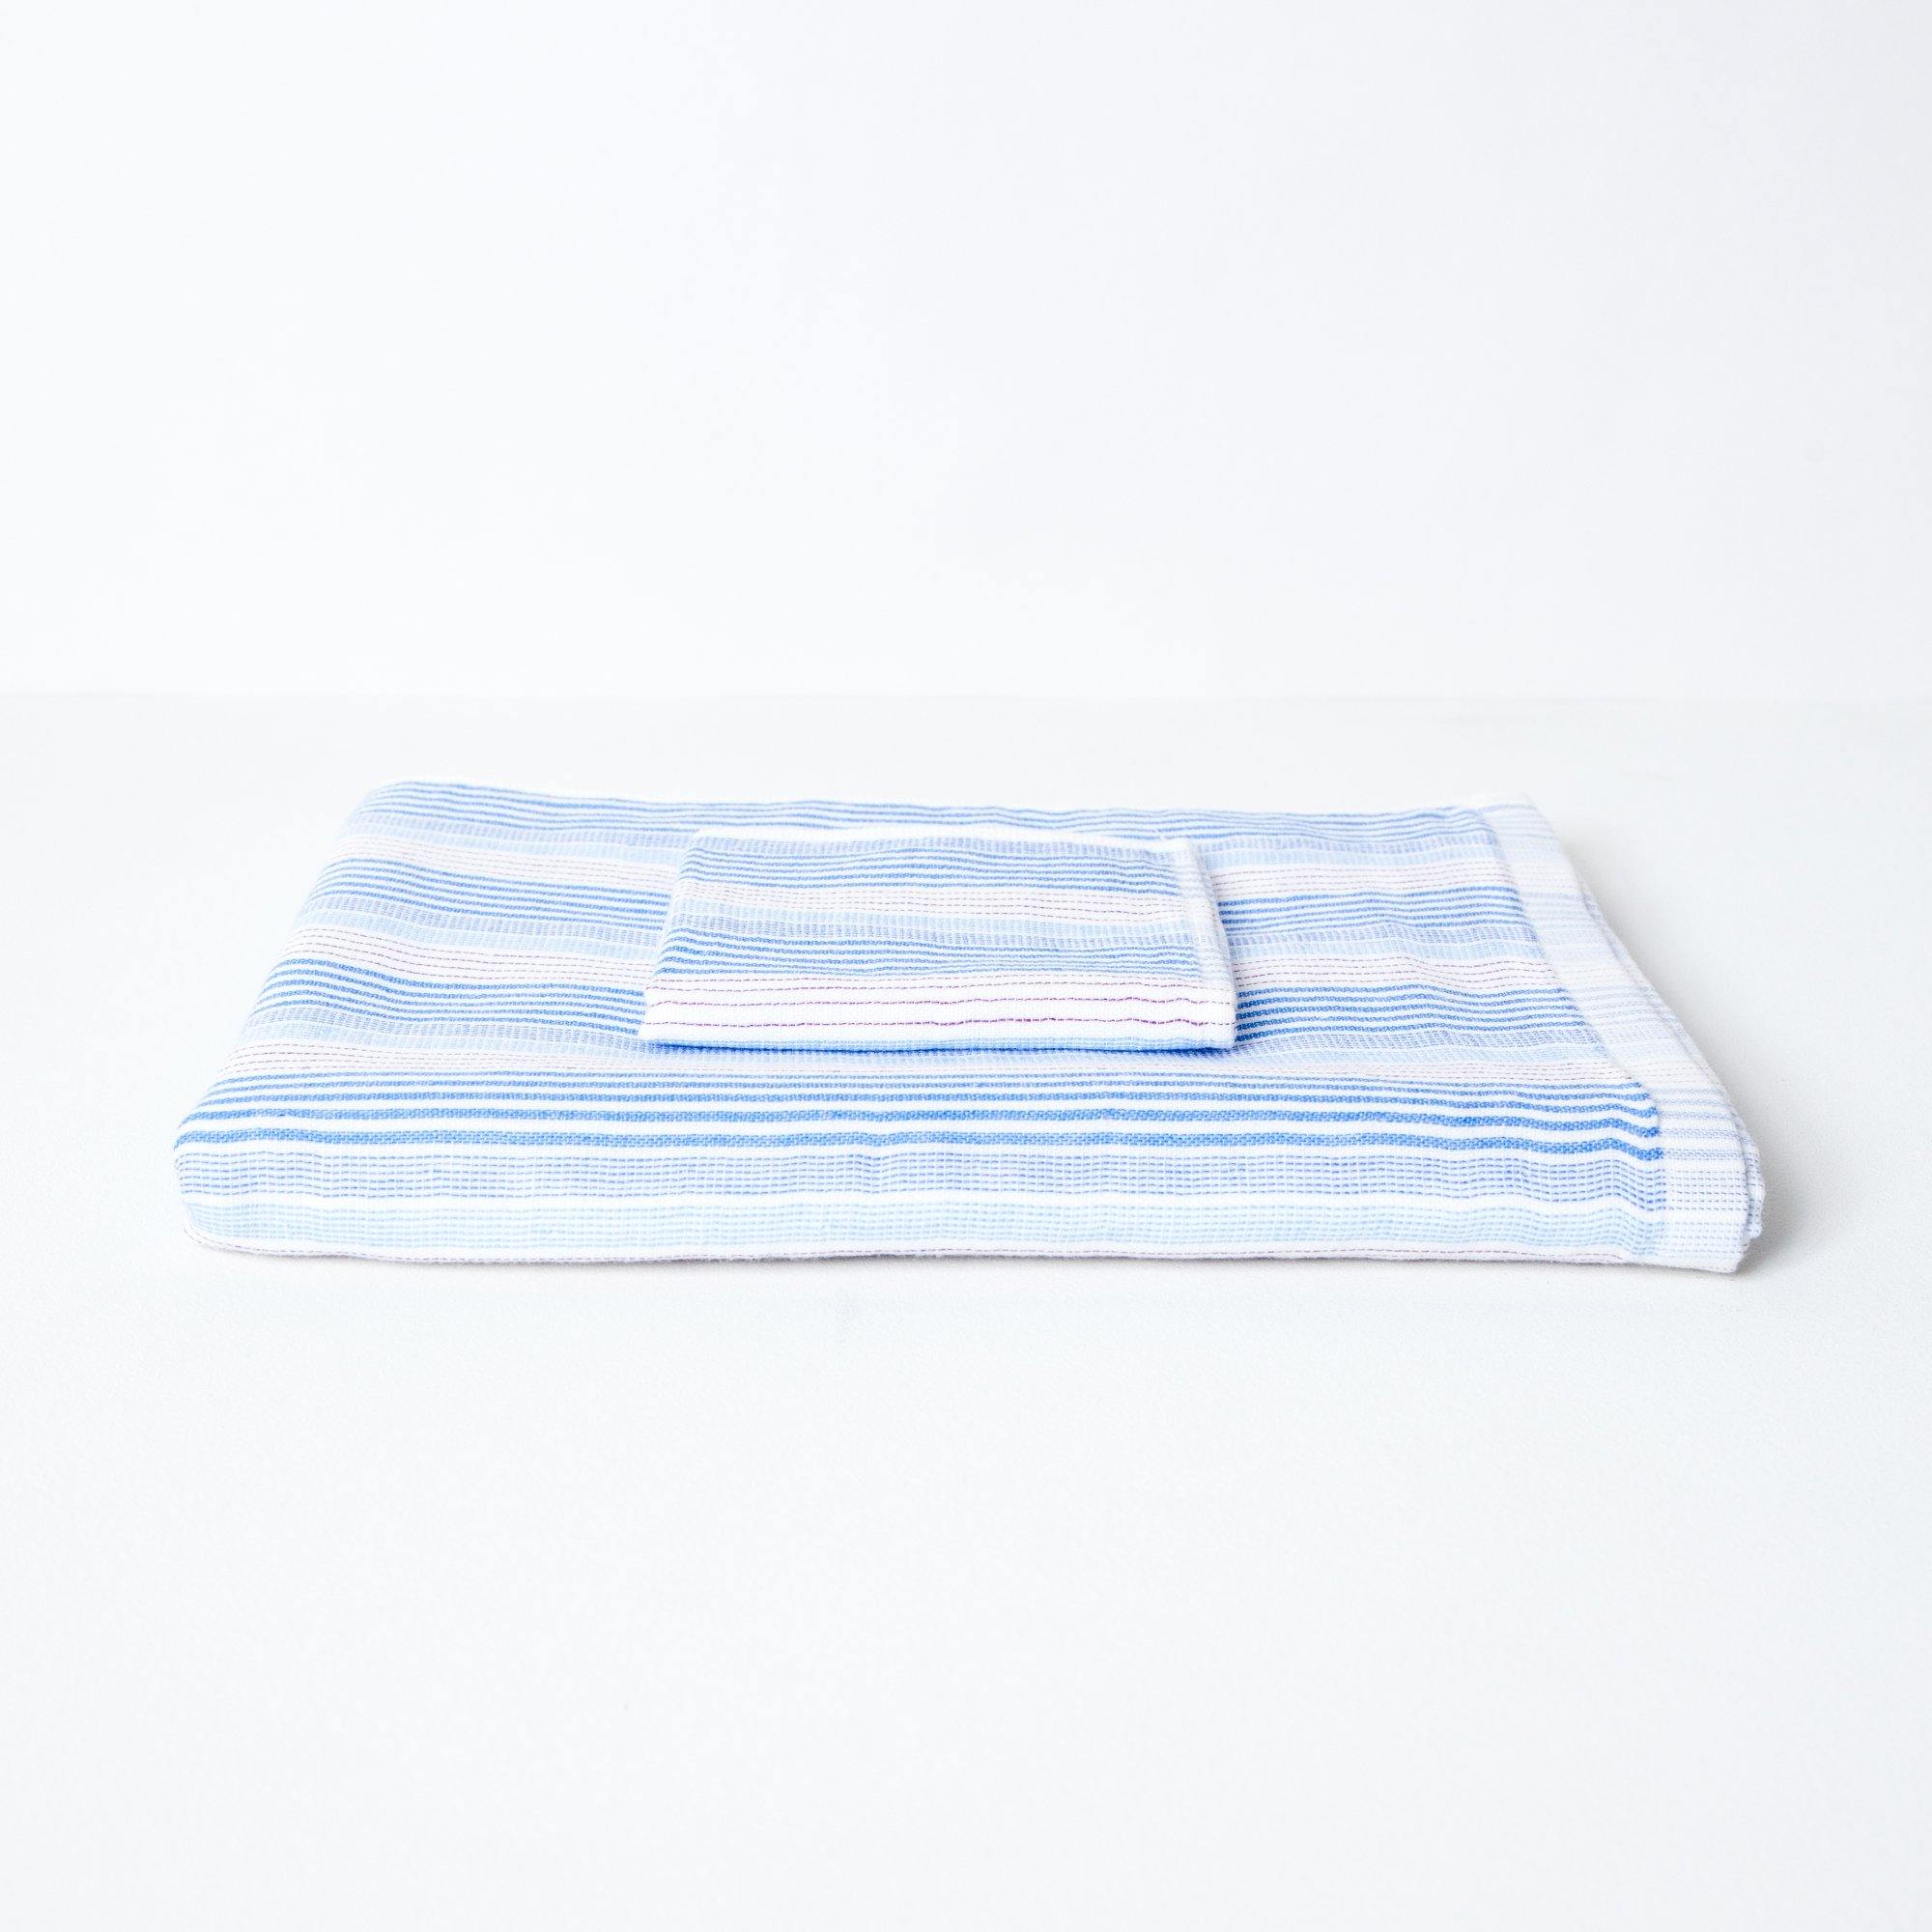 A striped towel with tones of blue and red, neatly folded with a coordinating flannel on top.